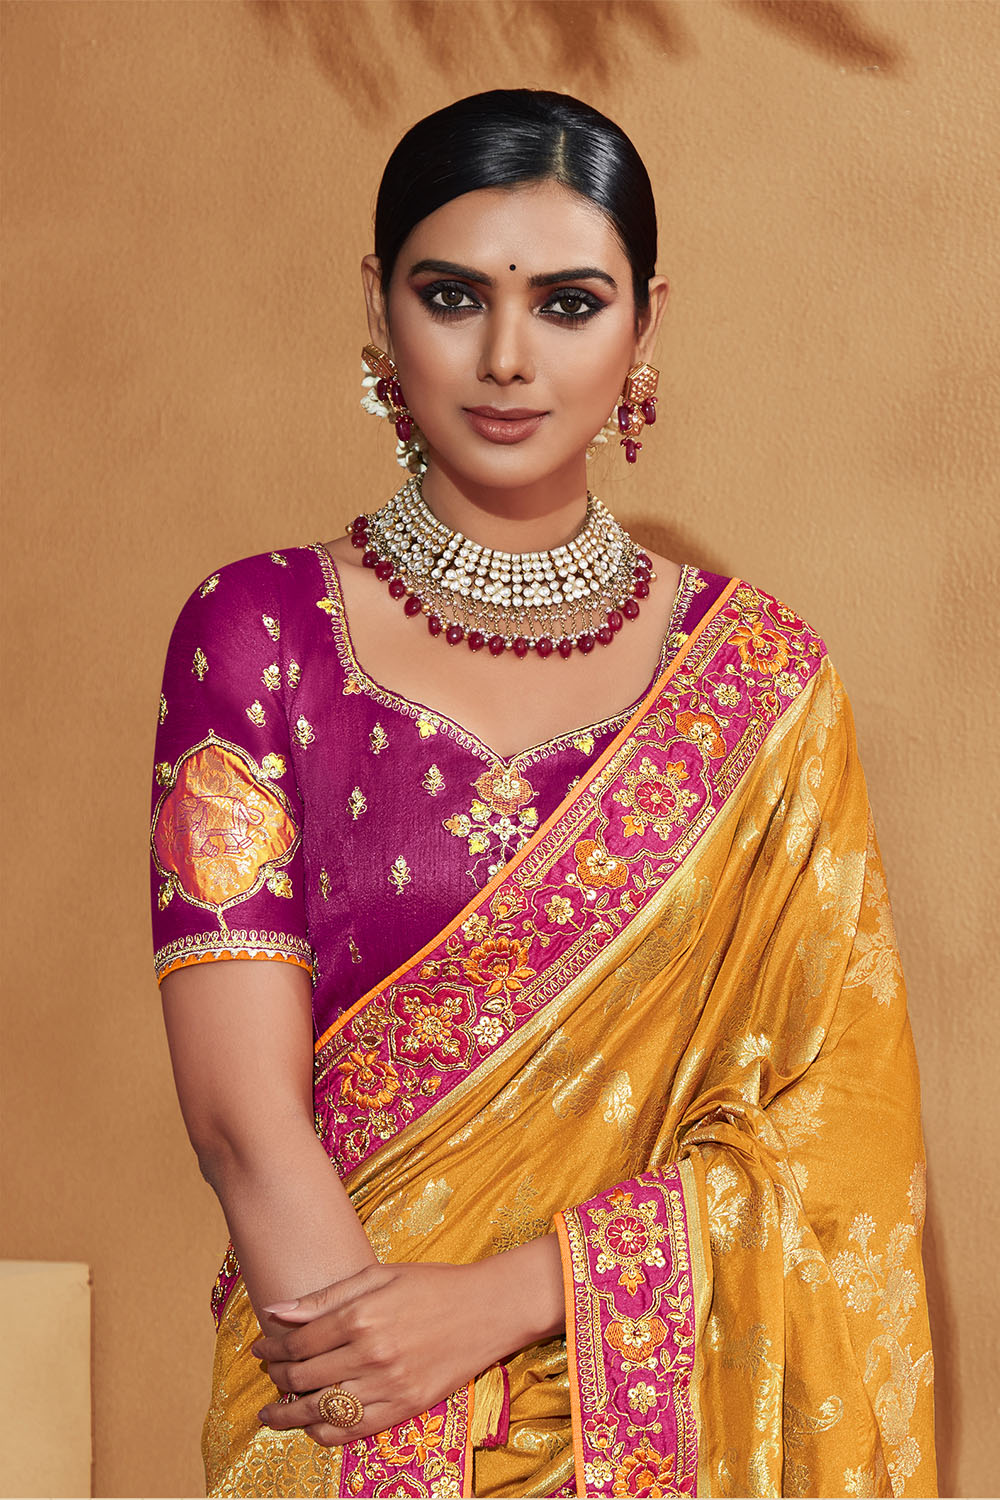 Mango Yellow with Rani Pink Stunning Designer Bridal Dola Silk Saree with Heavy Embroidered Blouse